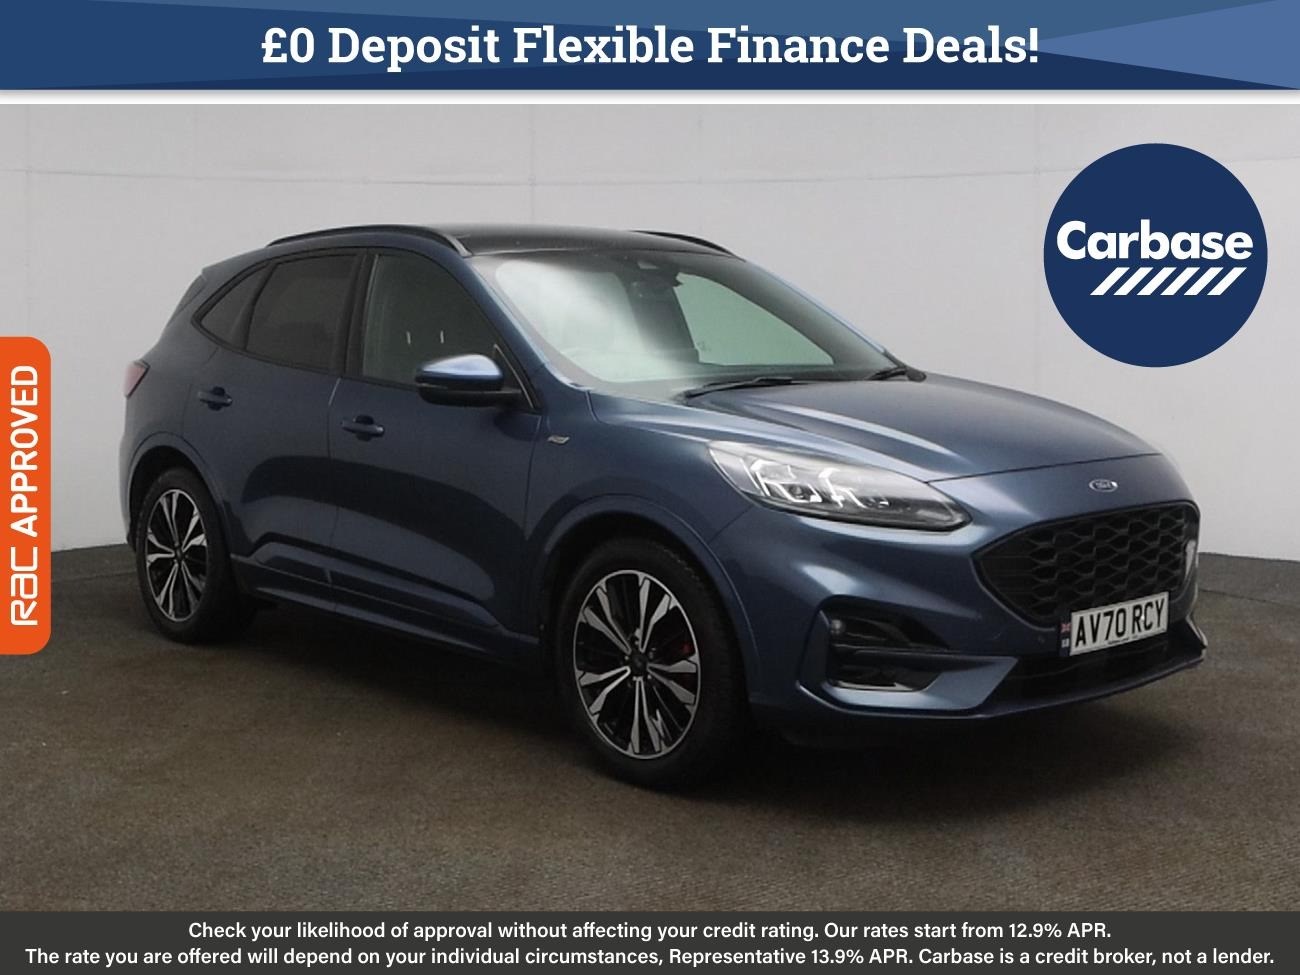 Used Ford Kuga Cars for Sale in Bristol, Finance Deals from Carbase